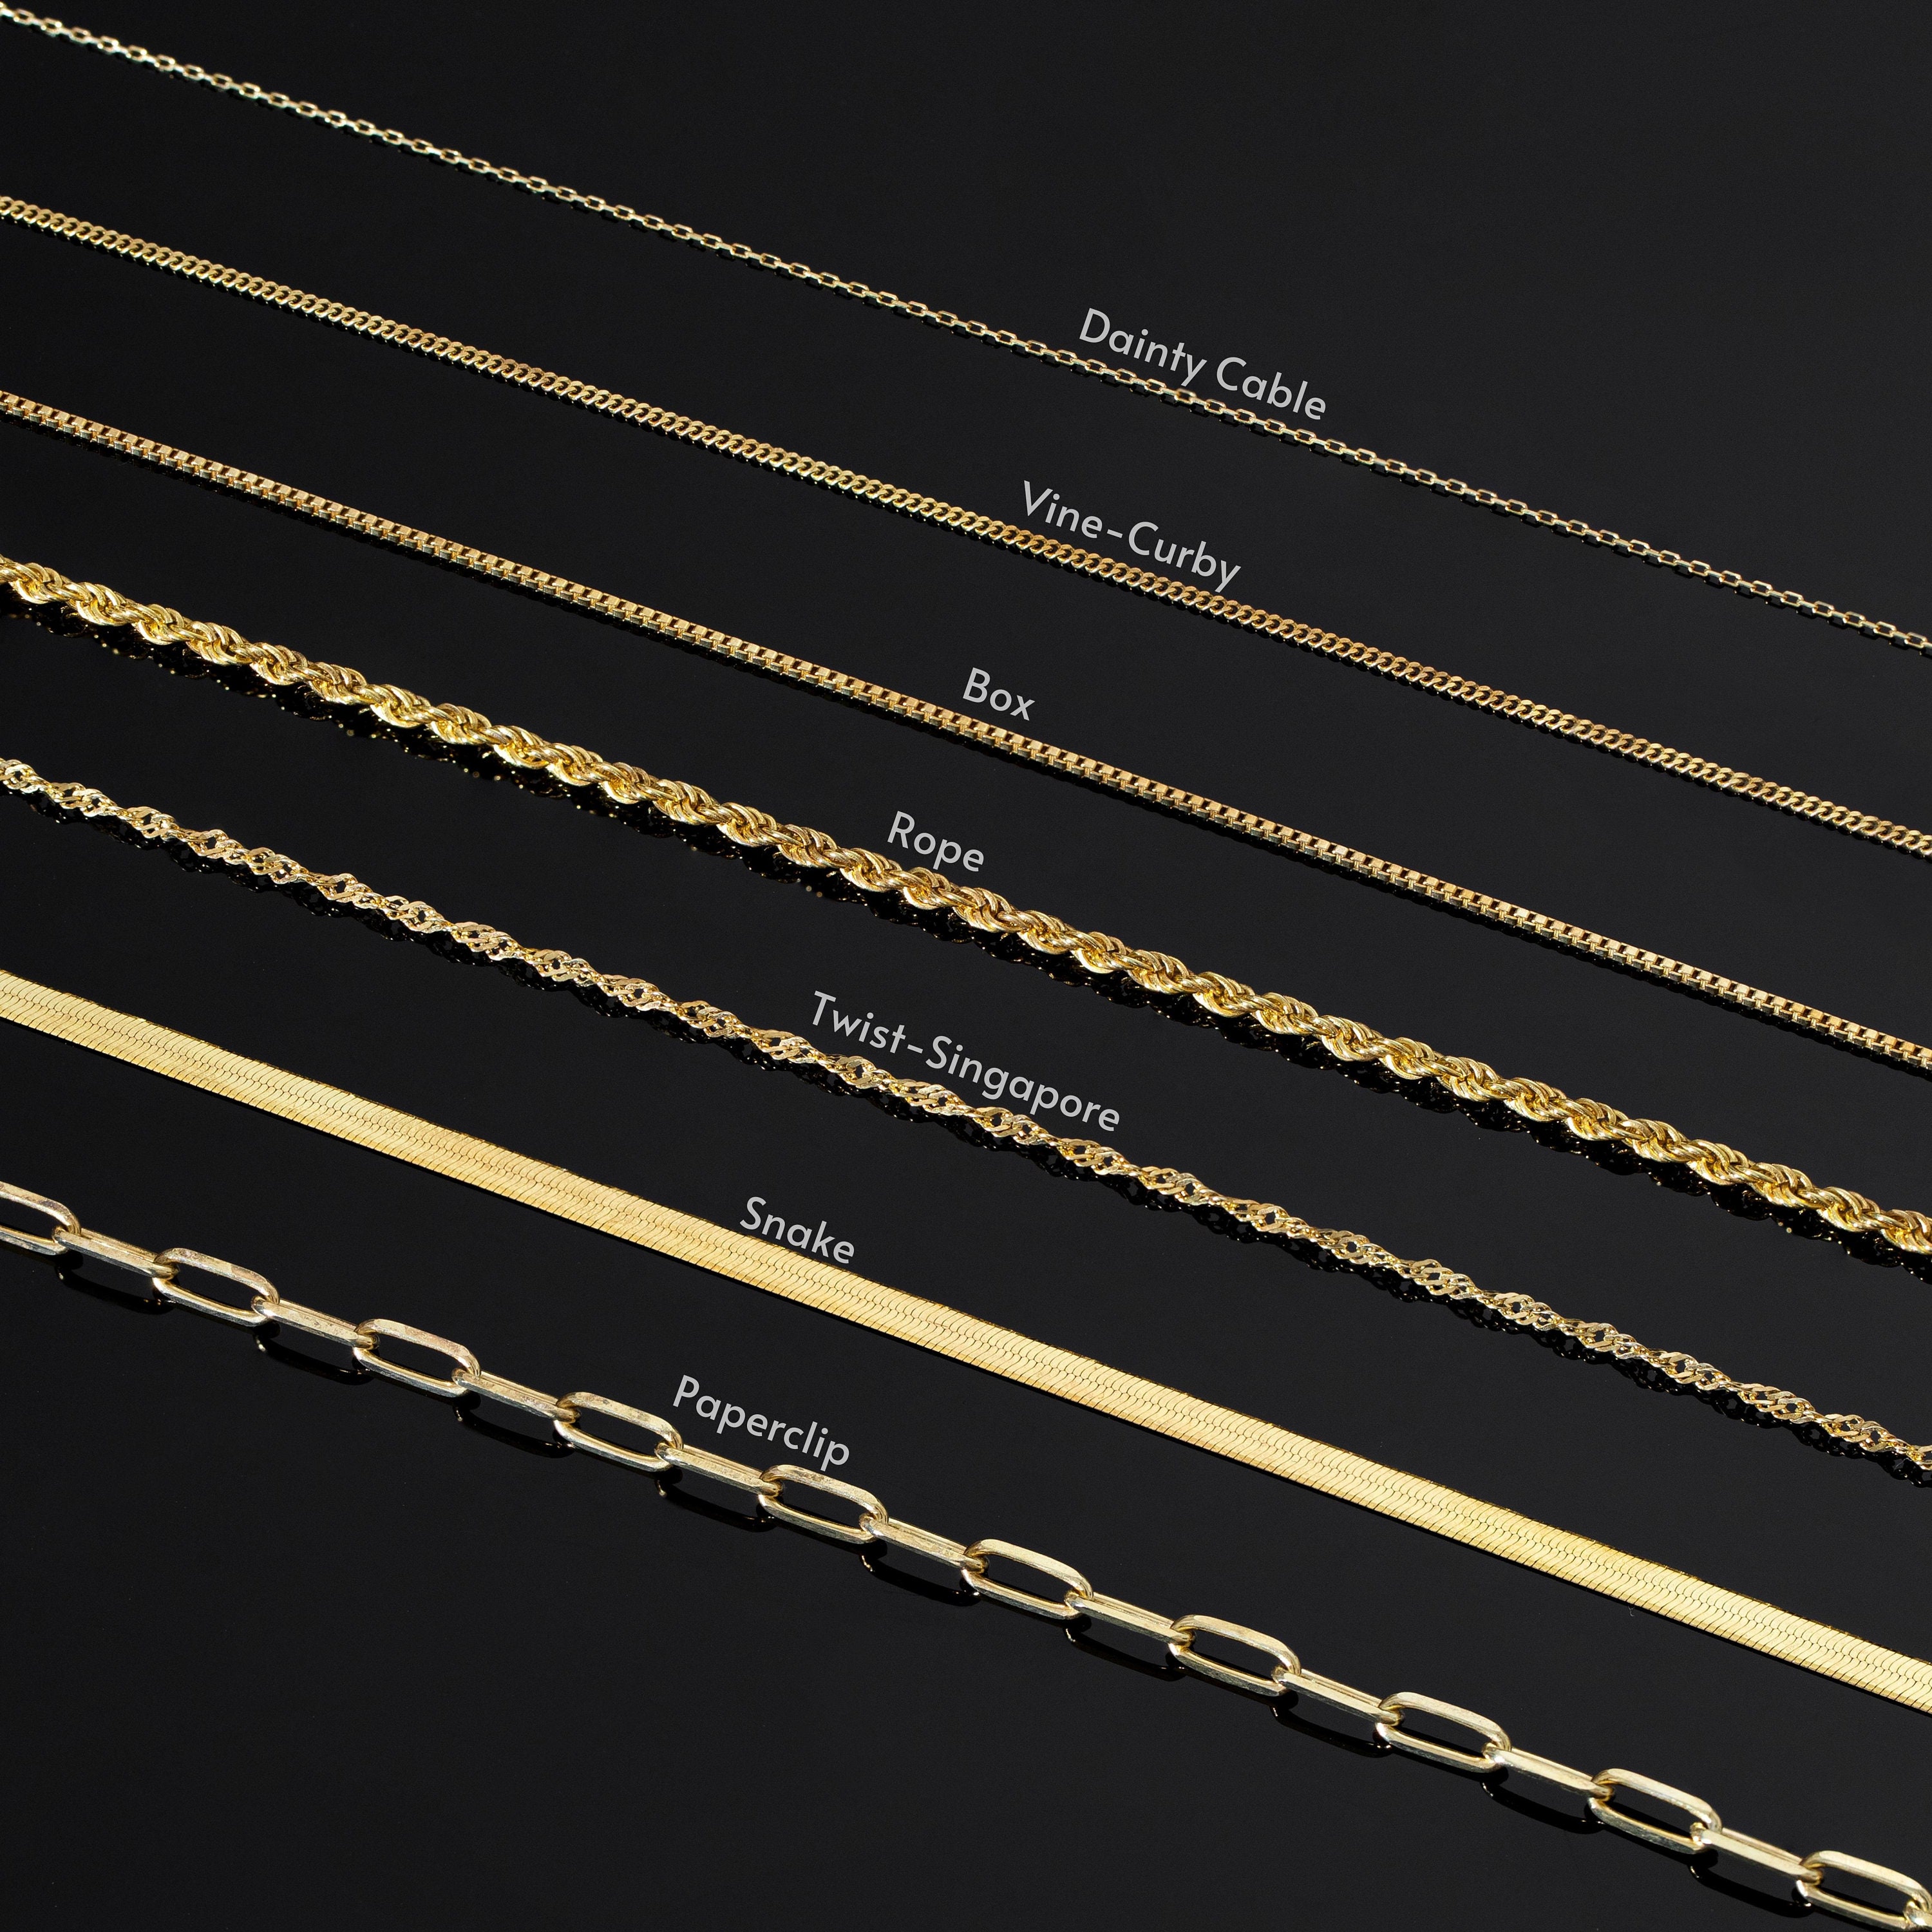 14k Gold Chain Necklace Box Chain Rope Chain Paperclip Chain Curby